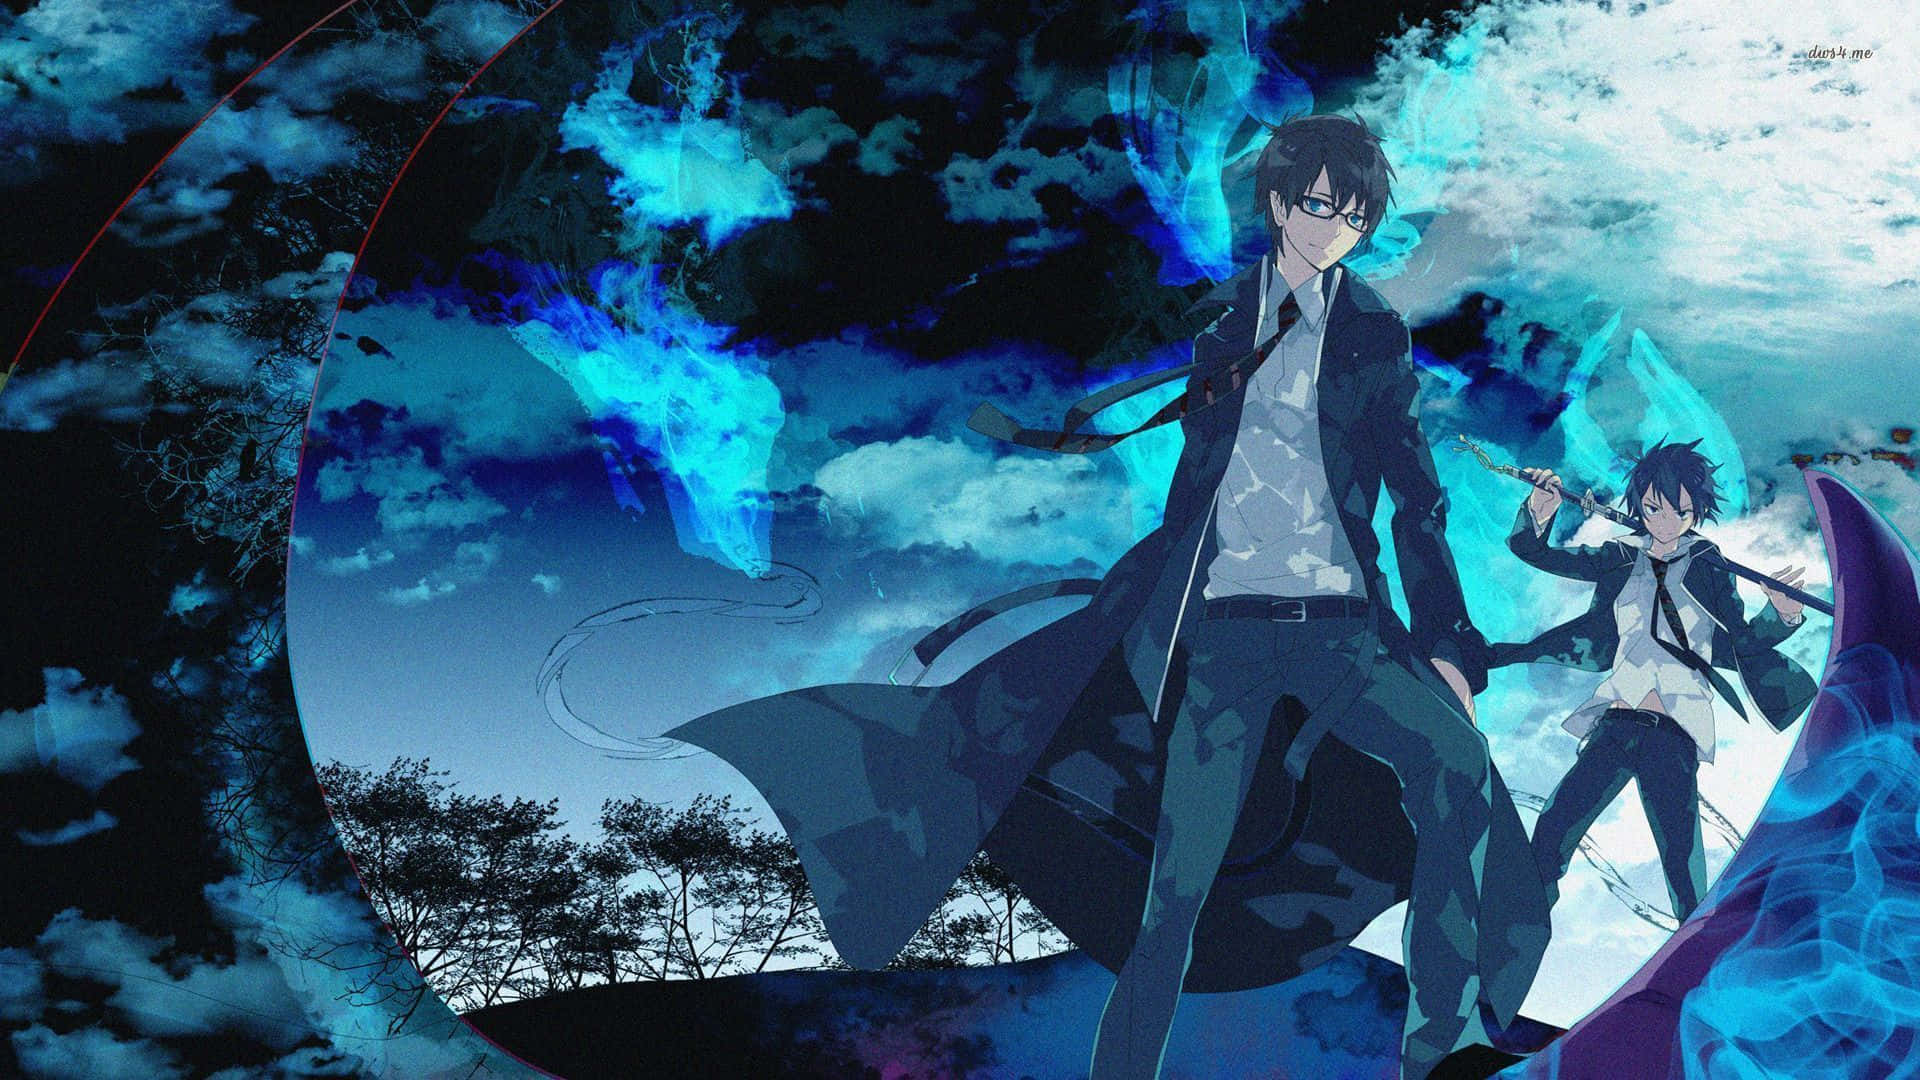 Google Anime Blue Excorcist Wallpaper